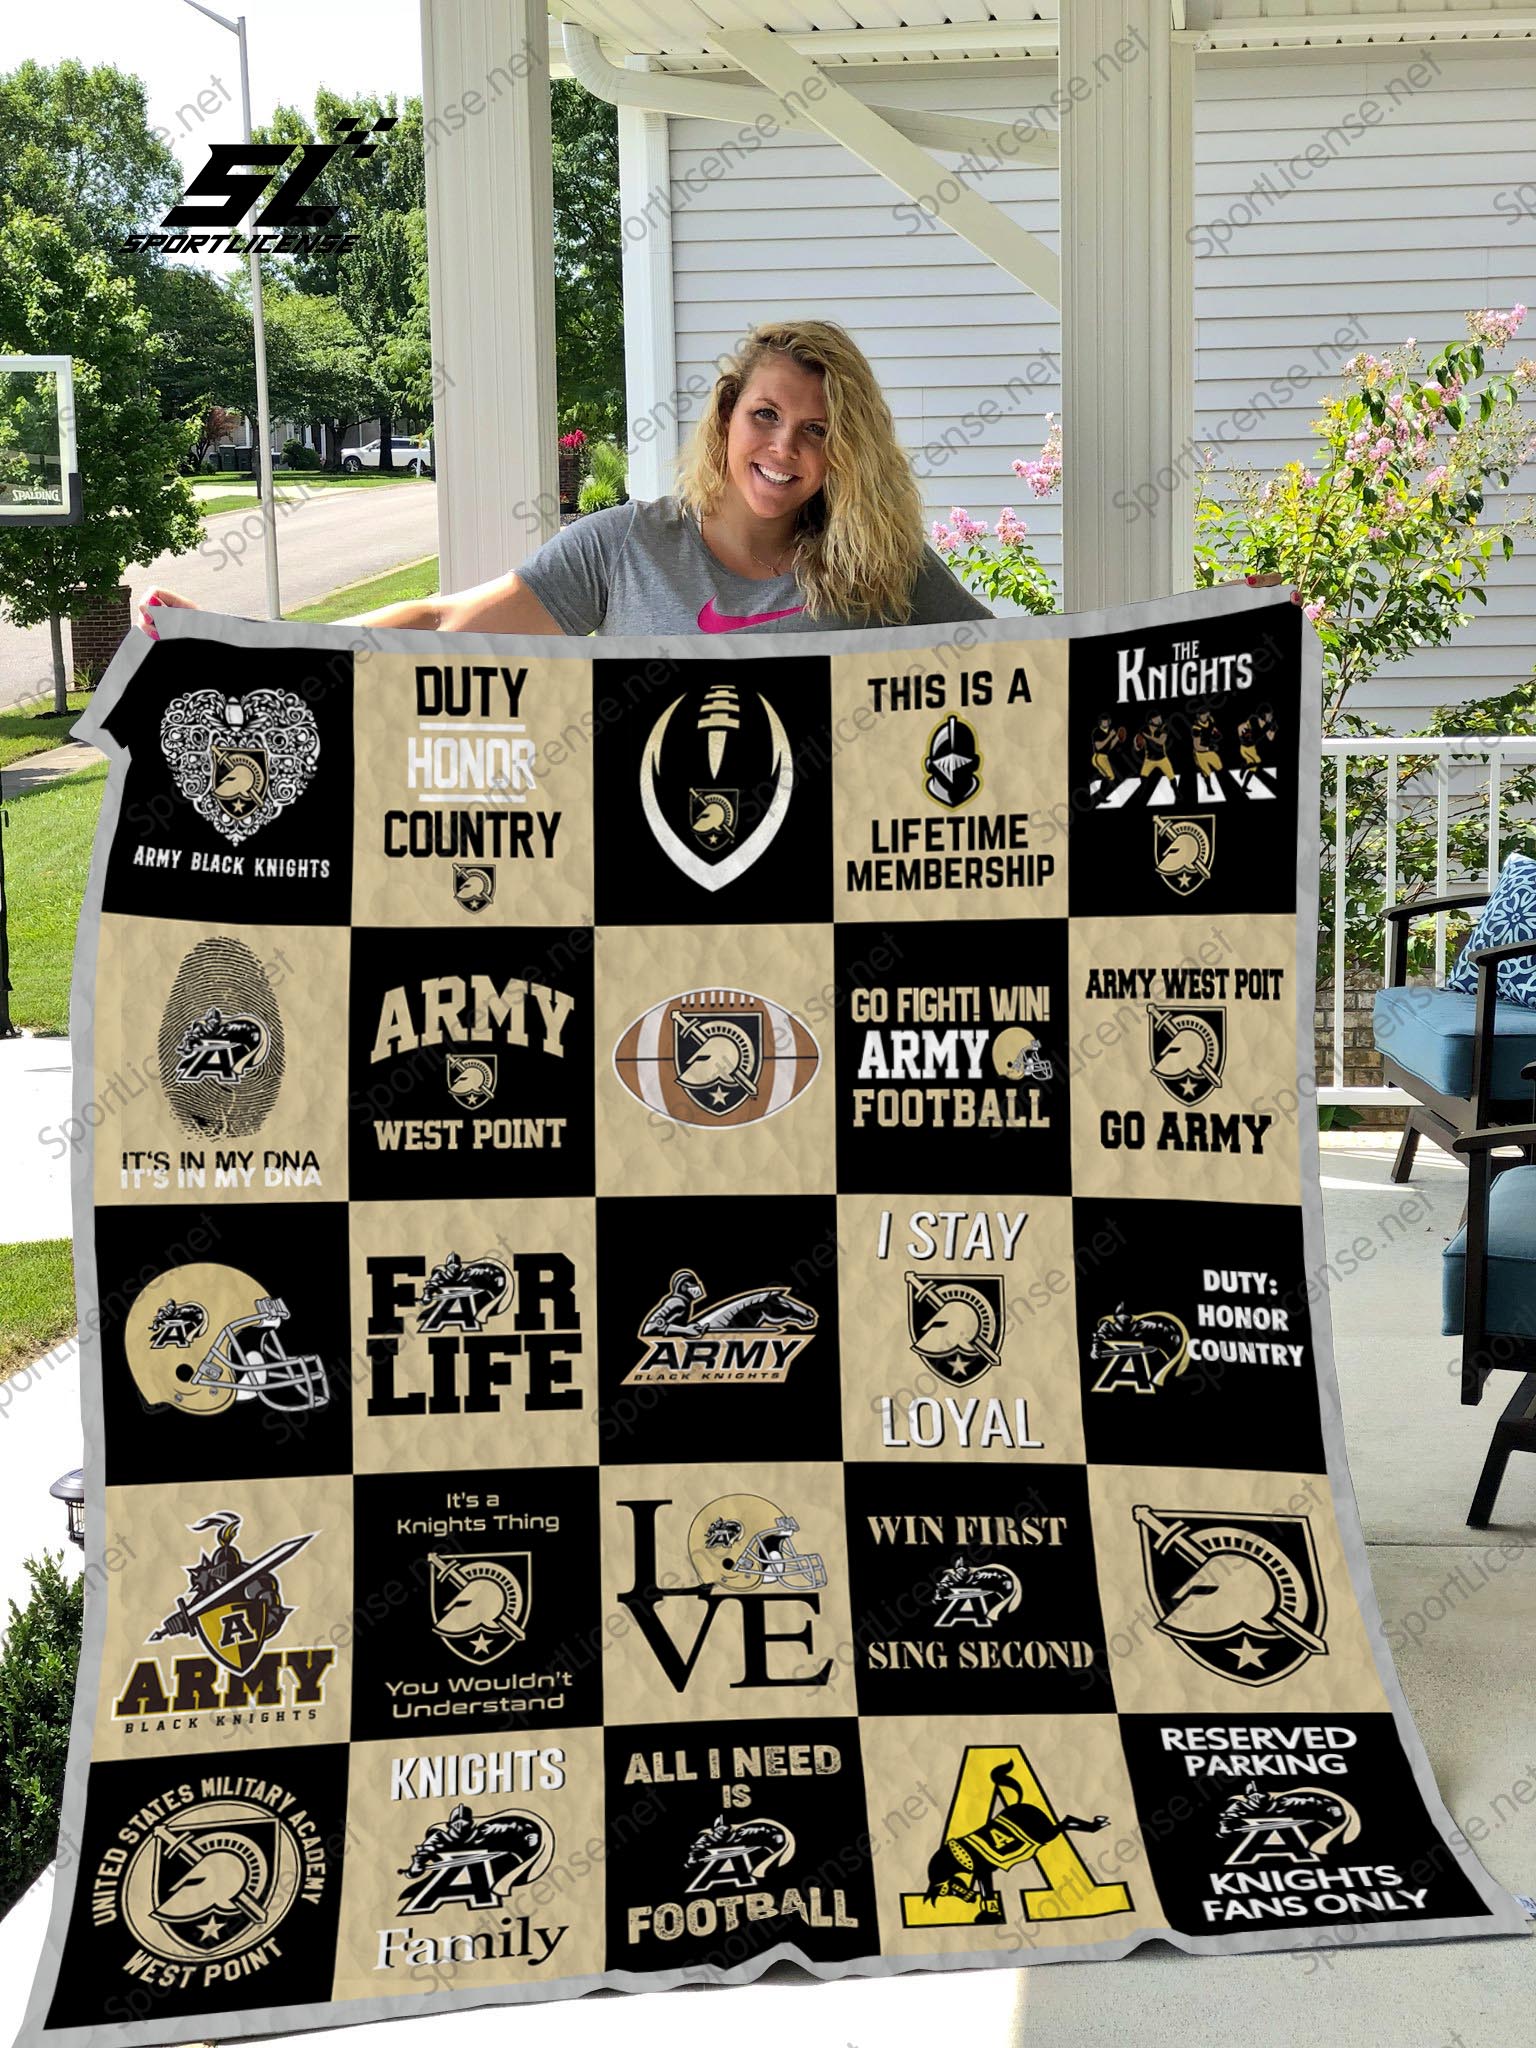 Army west point black knights quilt 4